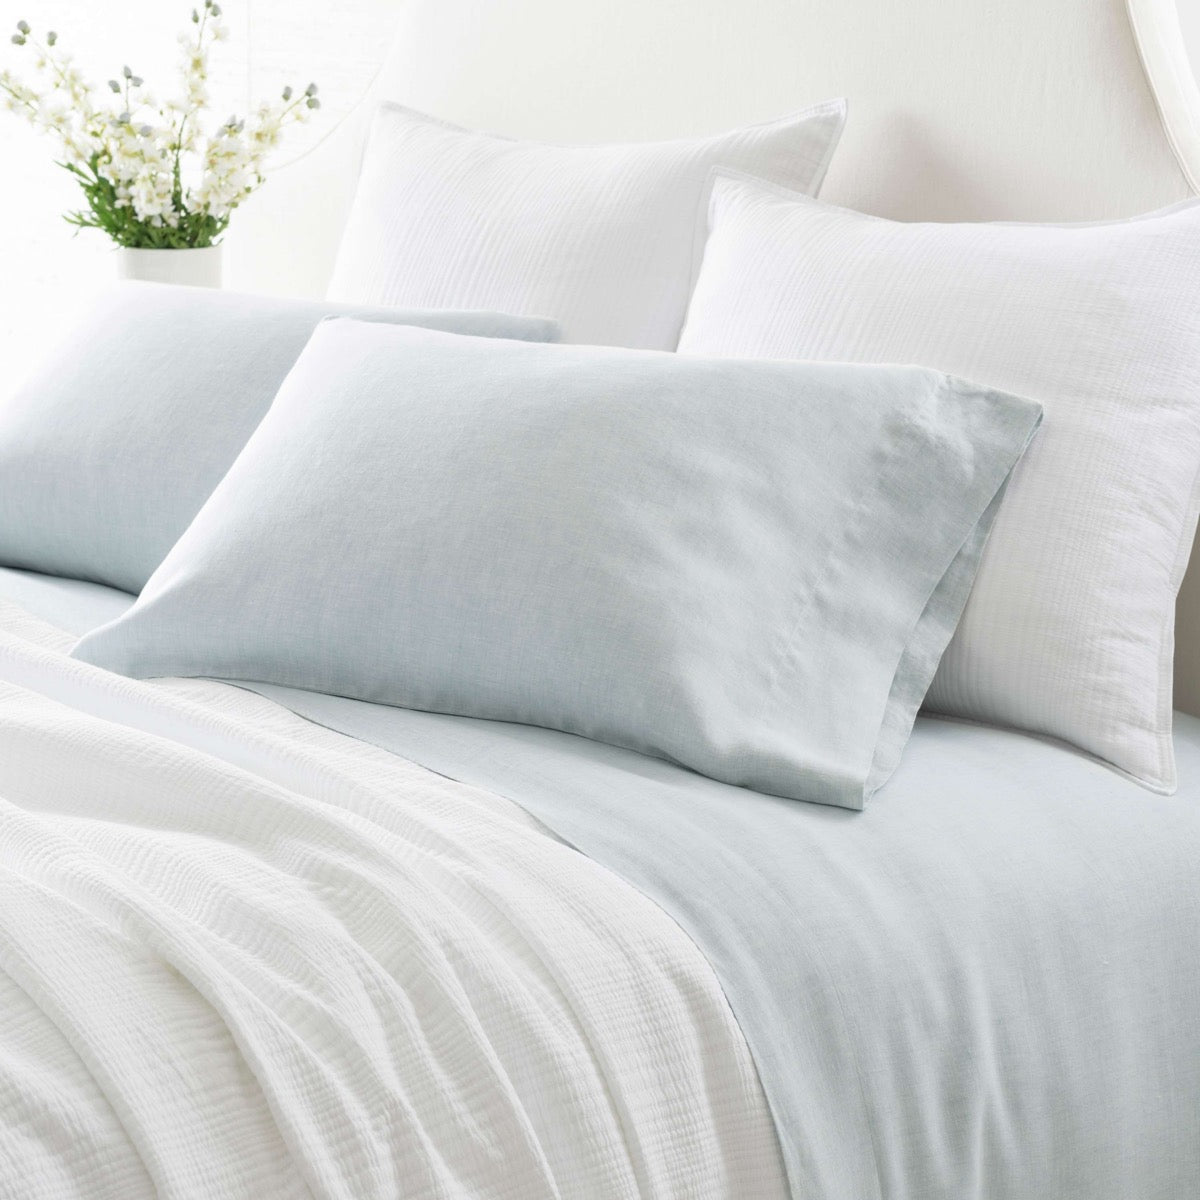 Lush Linen Sky Sheet Set styled with white bedding. Styled view. 